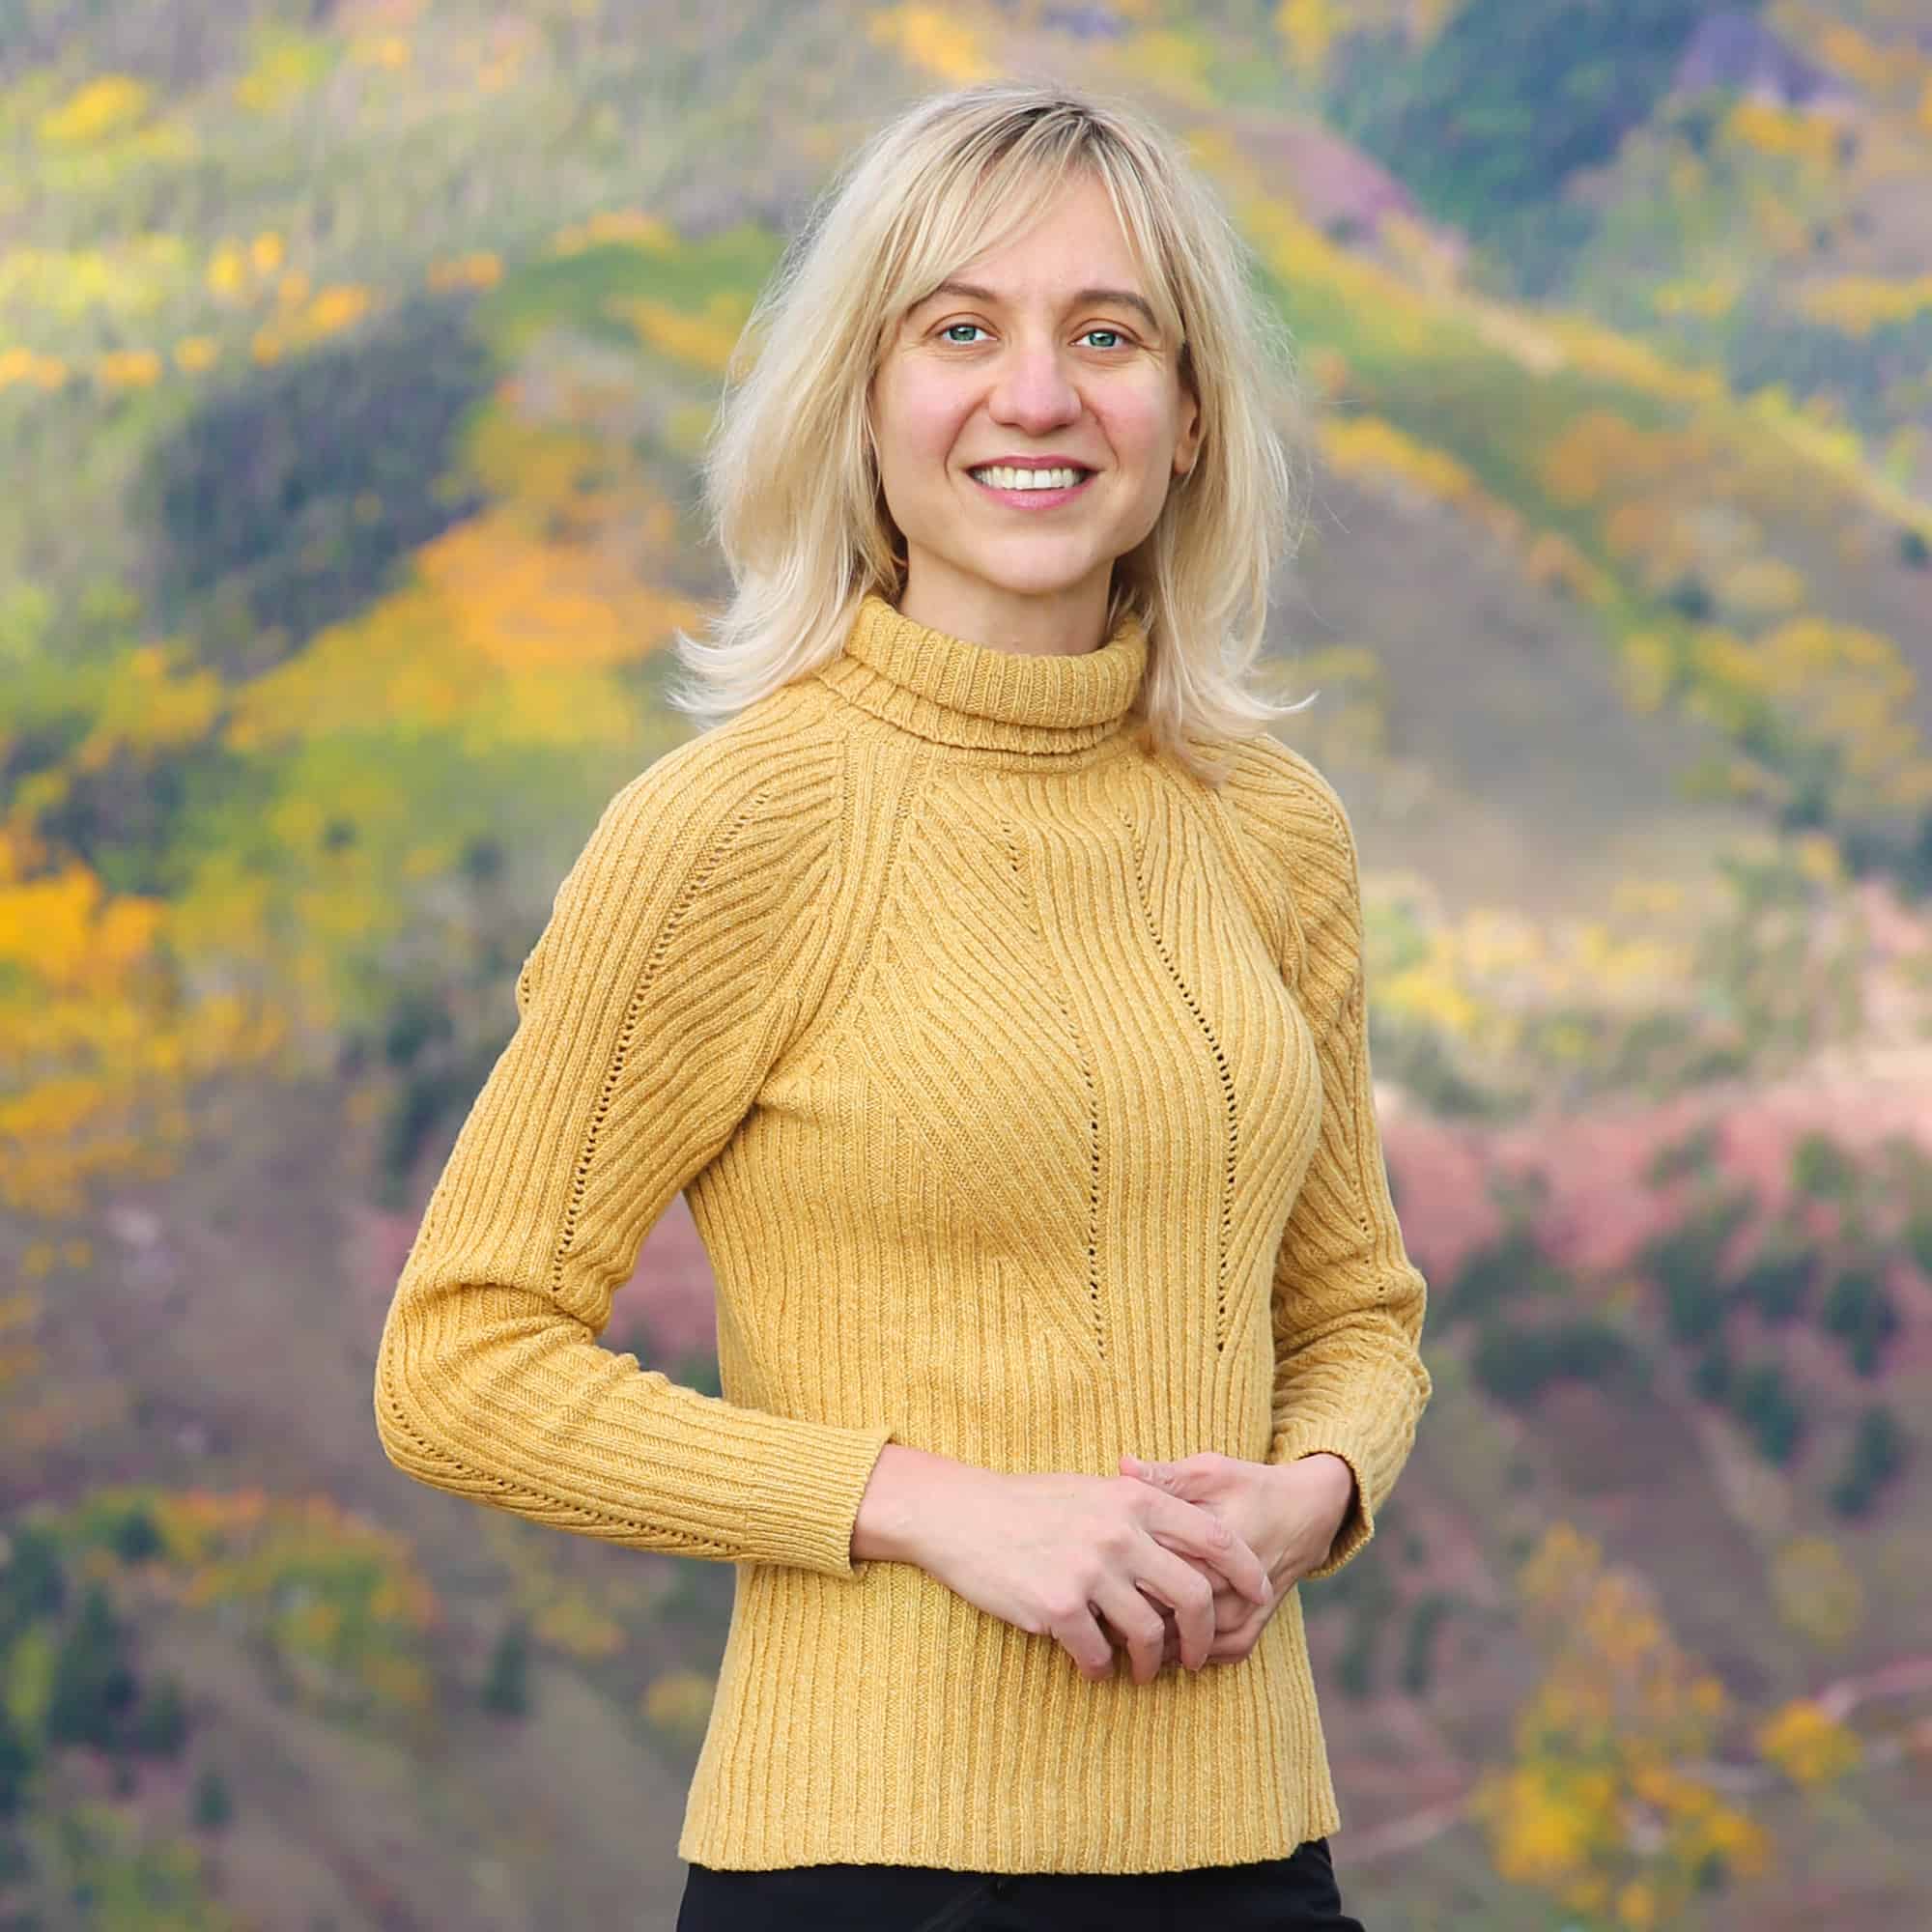 Julia is the author of JuliasAlbum.com (a food blog focused on easy dinner recipes, pasta dishes, salads made with seasonal ingredients). In this photo, Julia is pictured wearing a yellow sweater against an Autumn background.